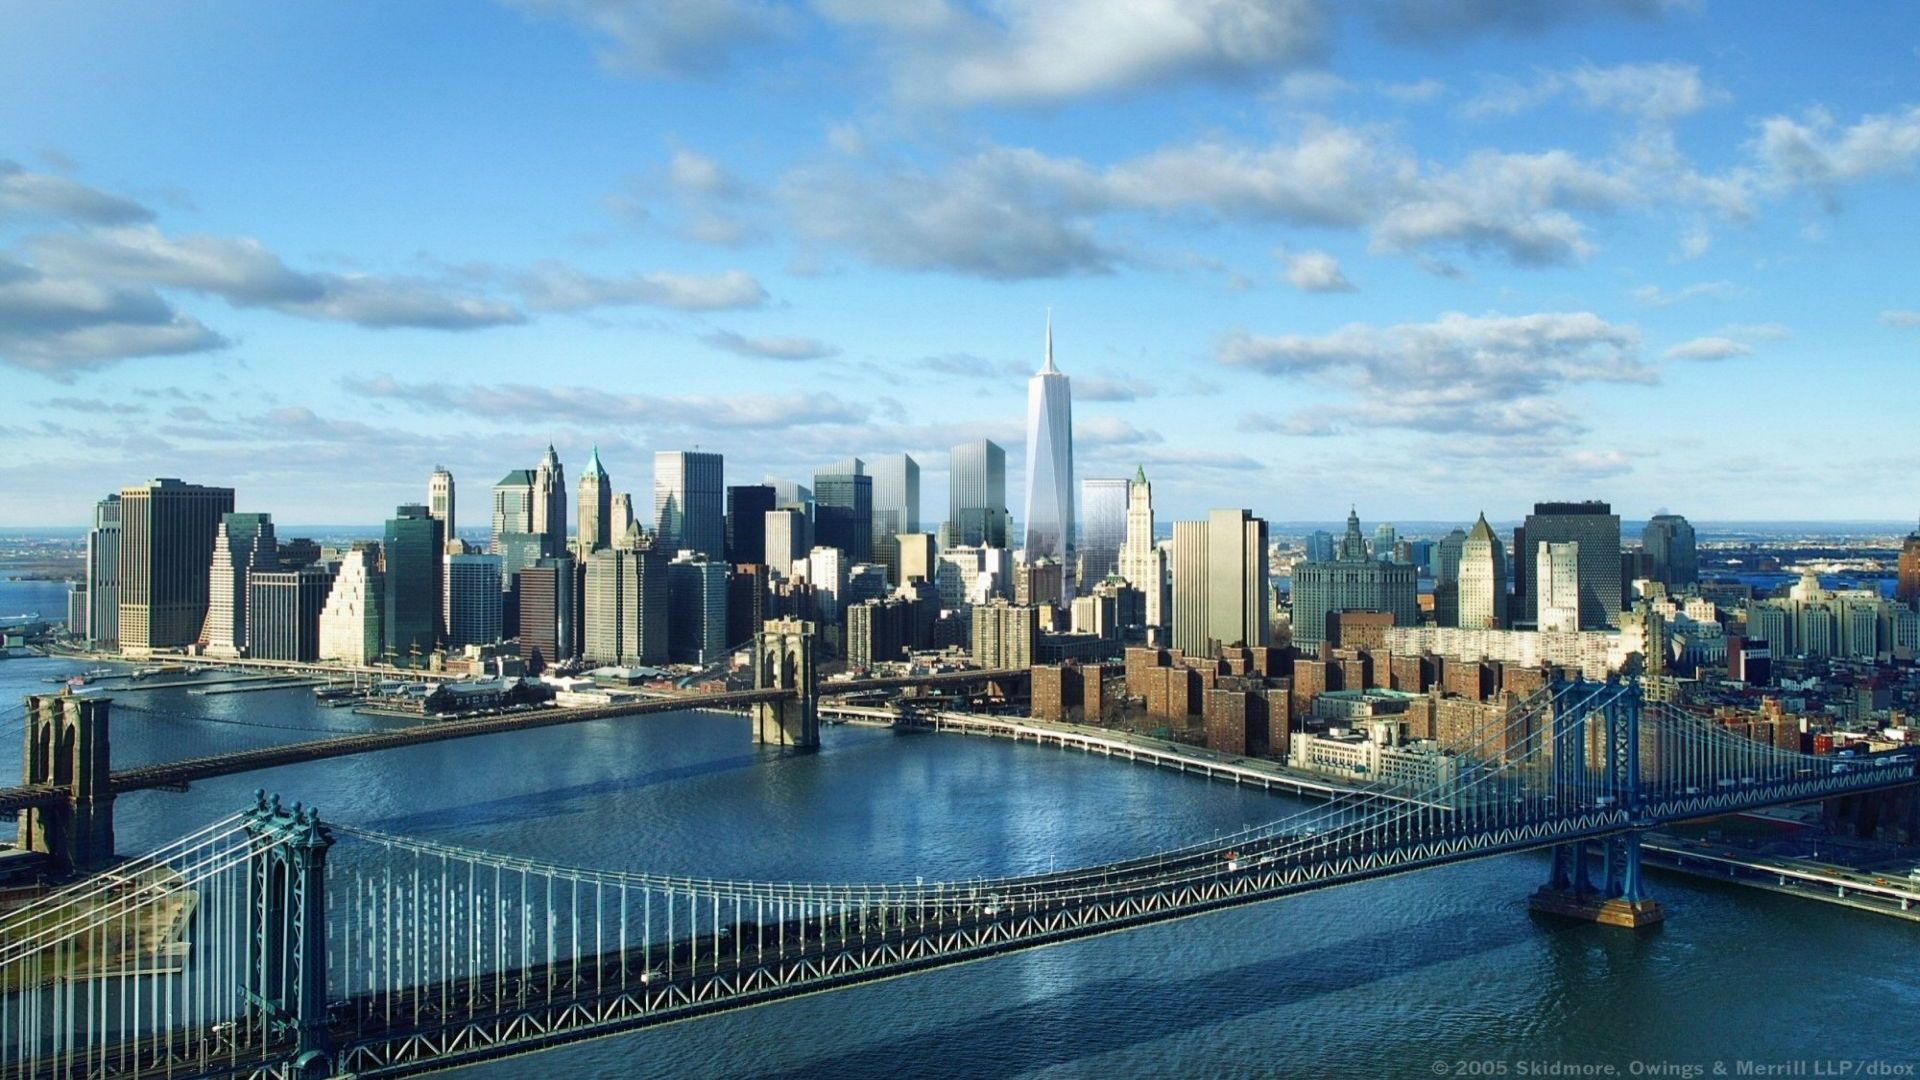 40 Hd New York City Wallpapers Backgrounds For Free Download